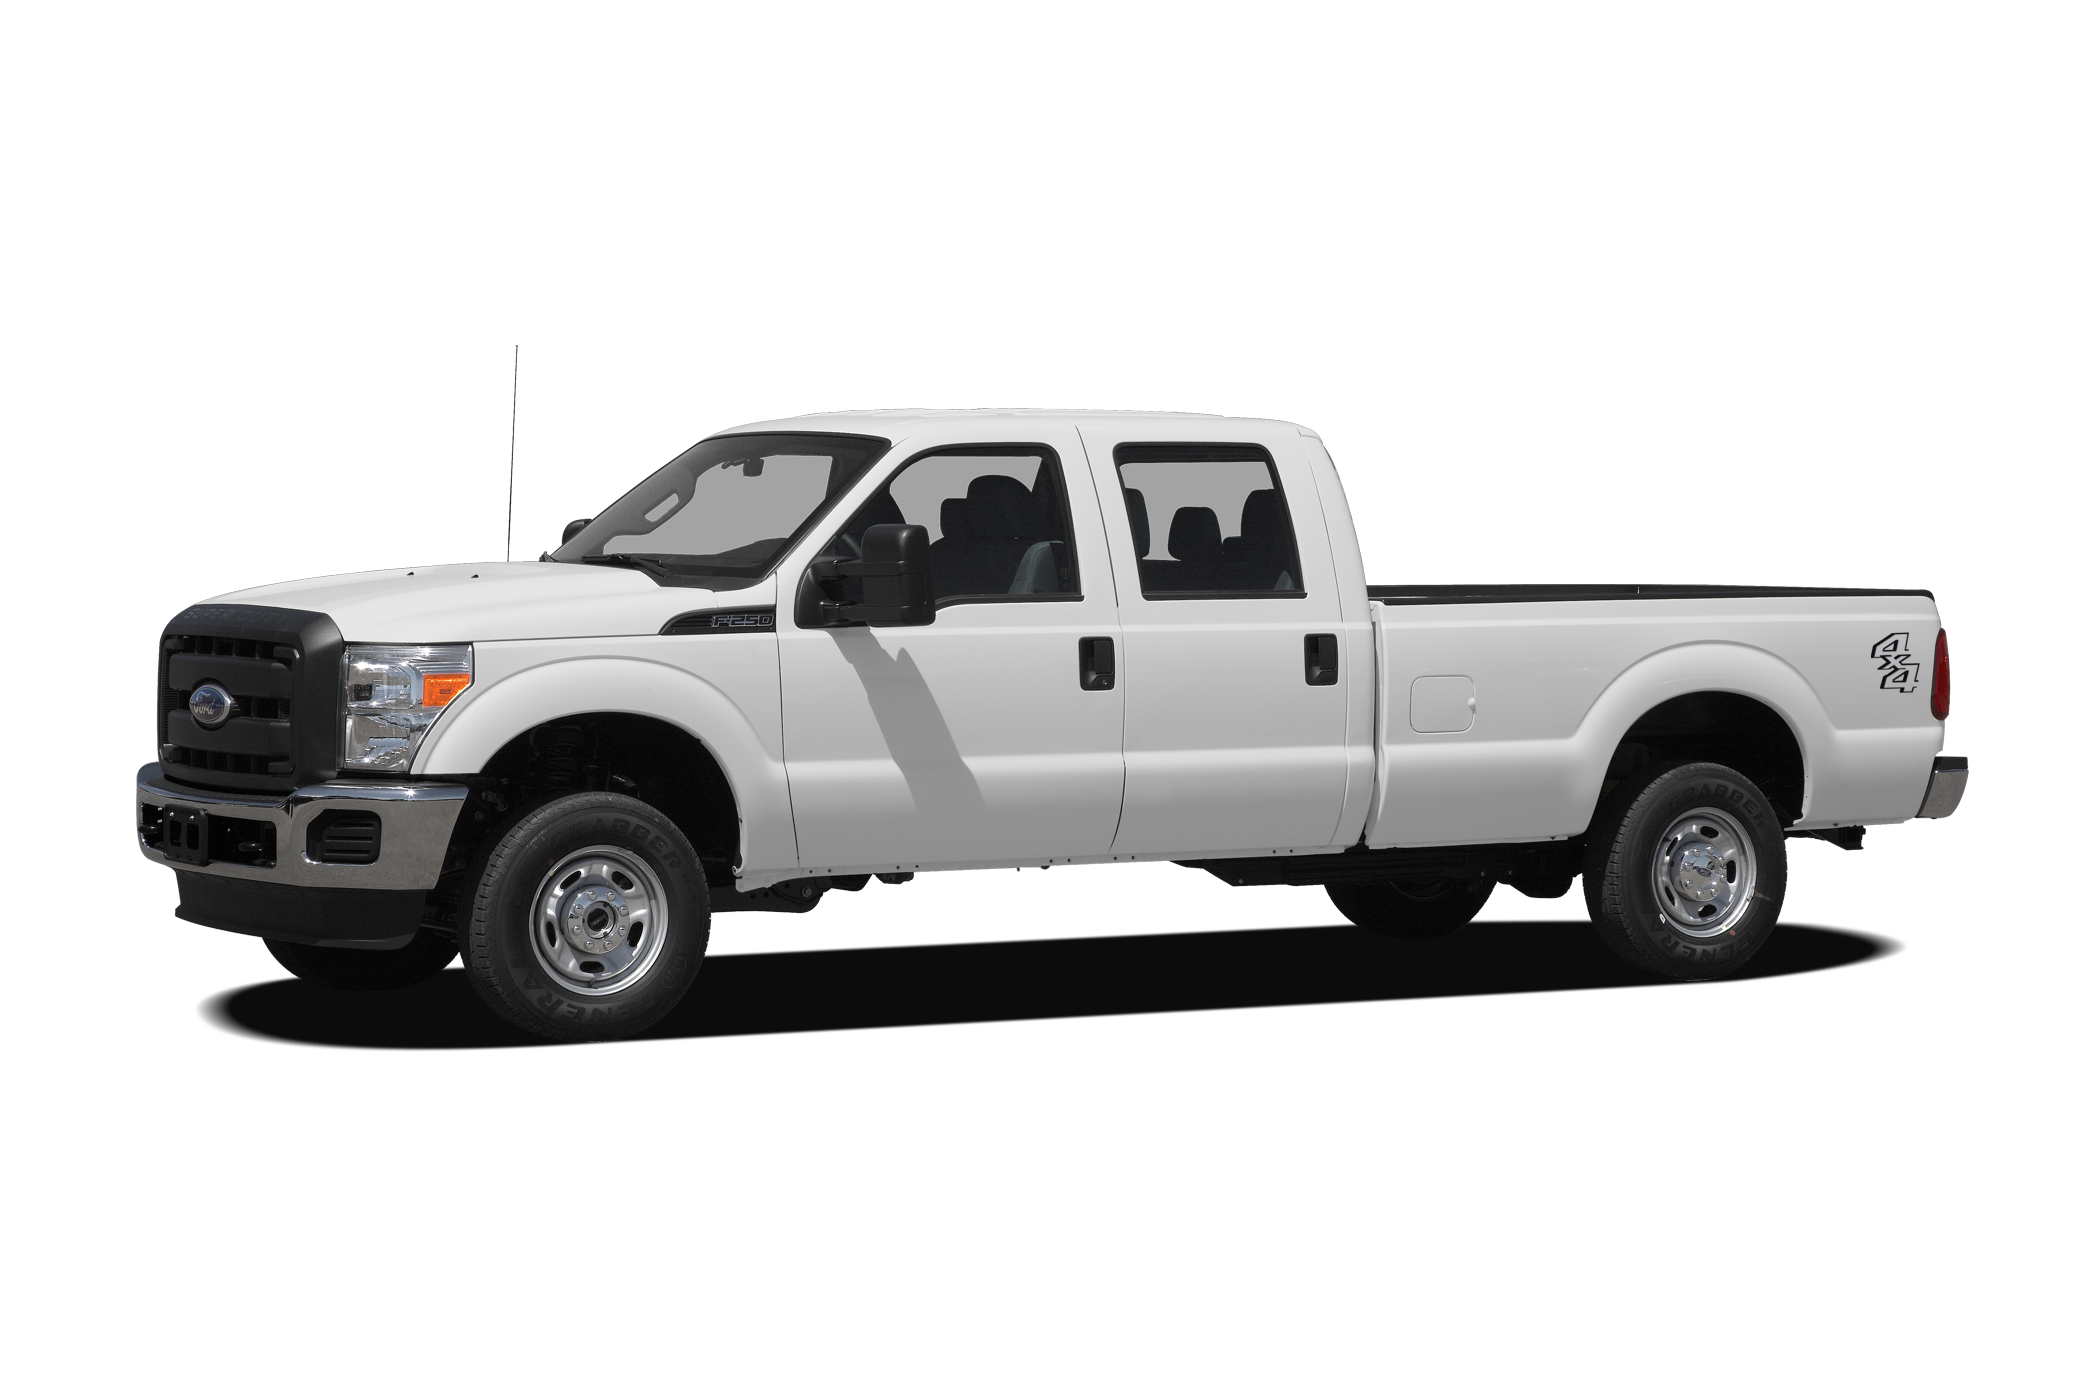 Used 2011 Ford F 250 Trucks For Sale Near Me